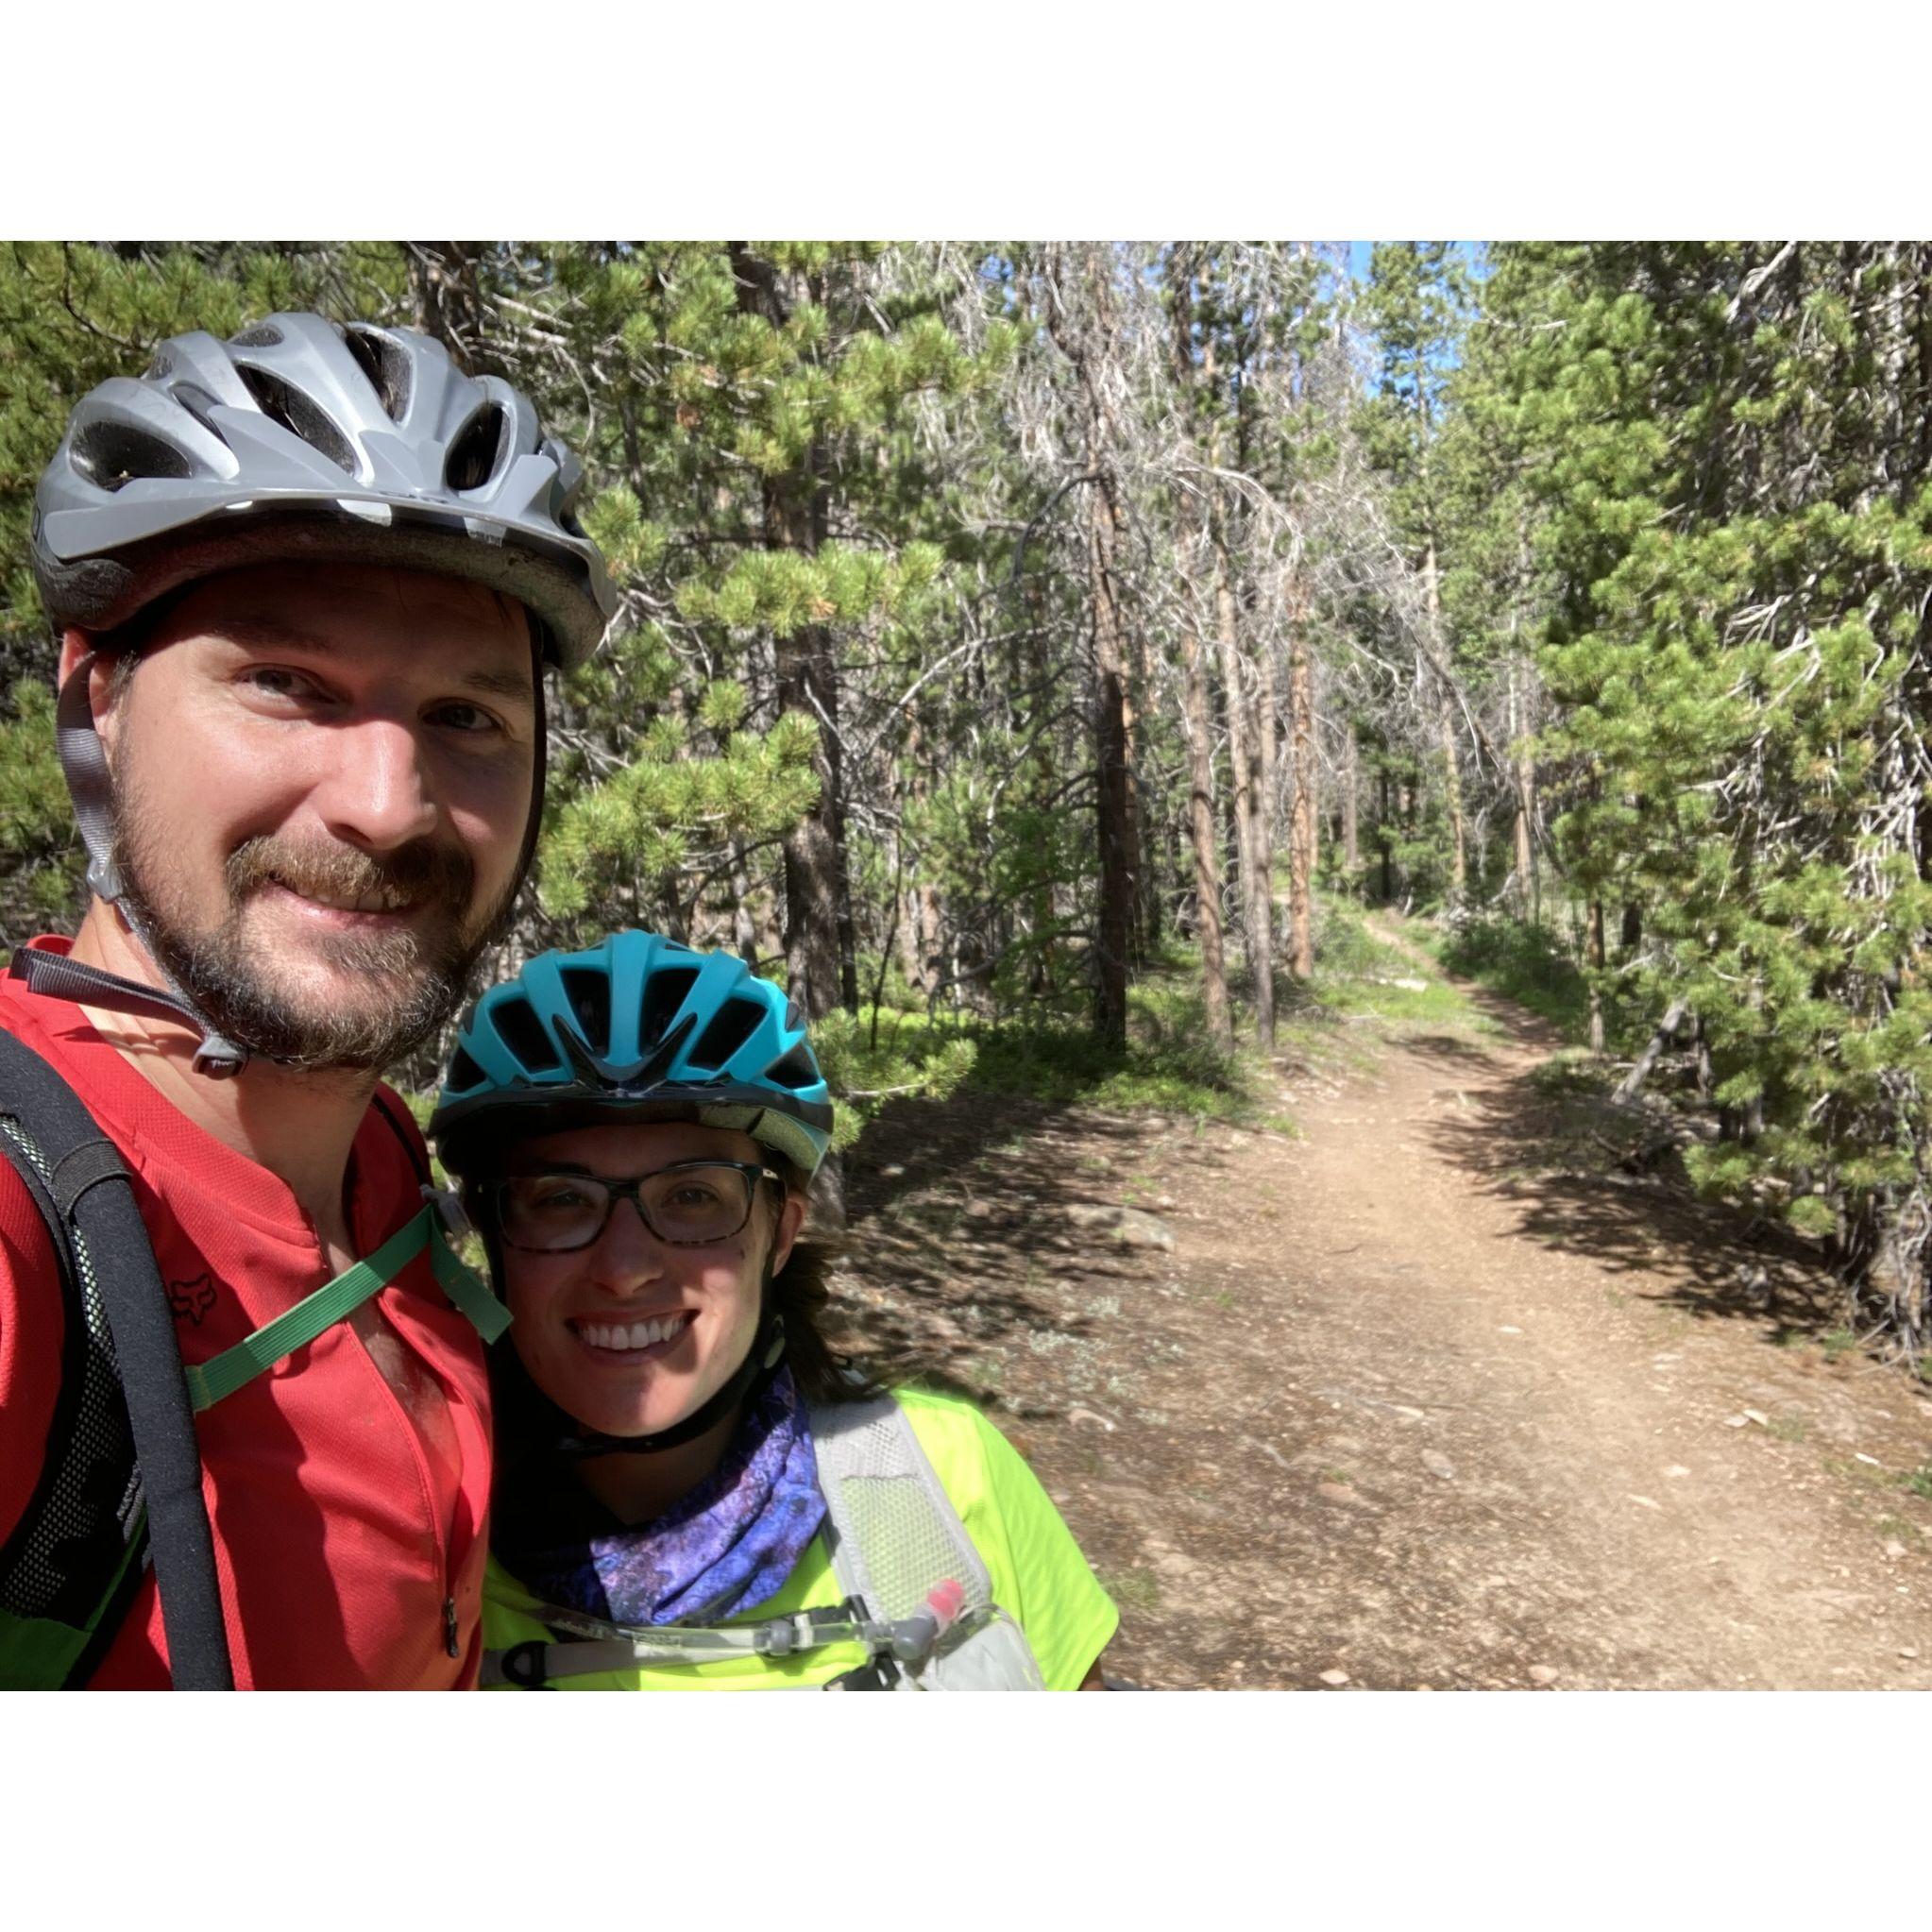 Epic mountain biking in Curt Gowdy State Park, WY. We got really into it during COVID -- just need to get Jenn a bike!